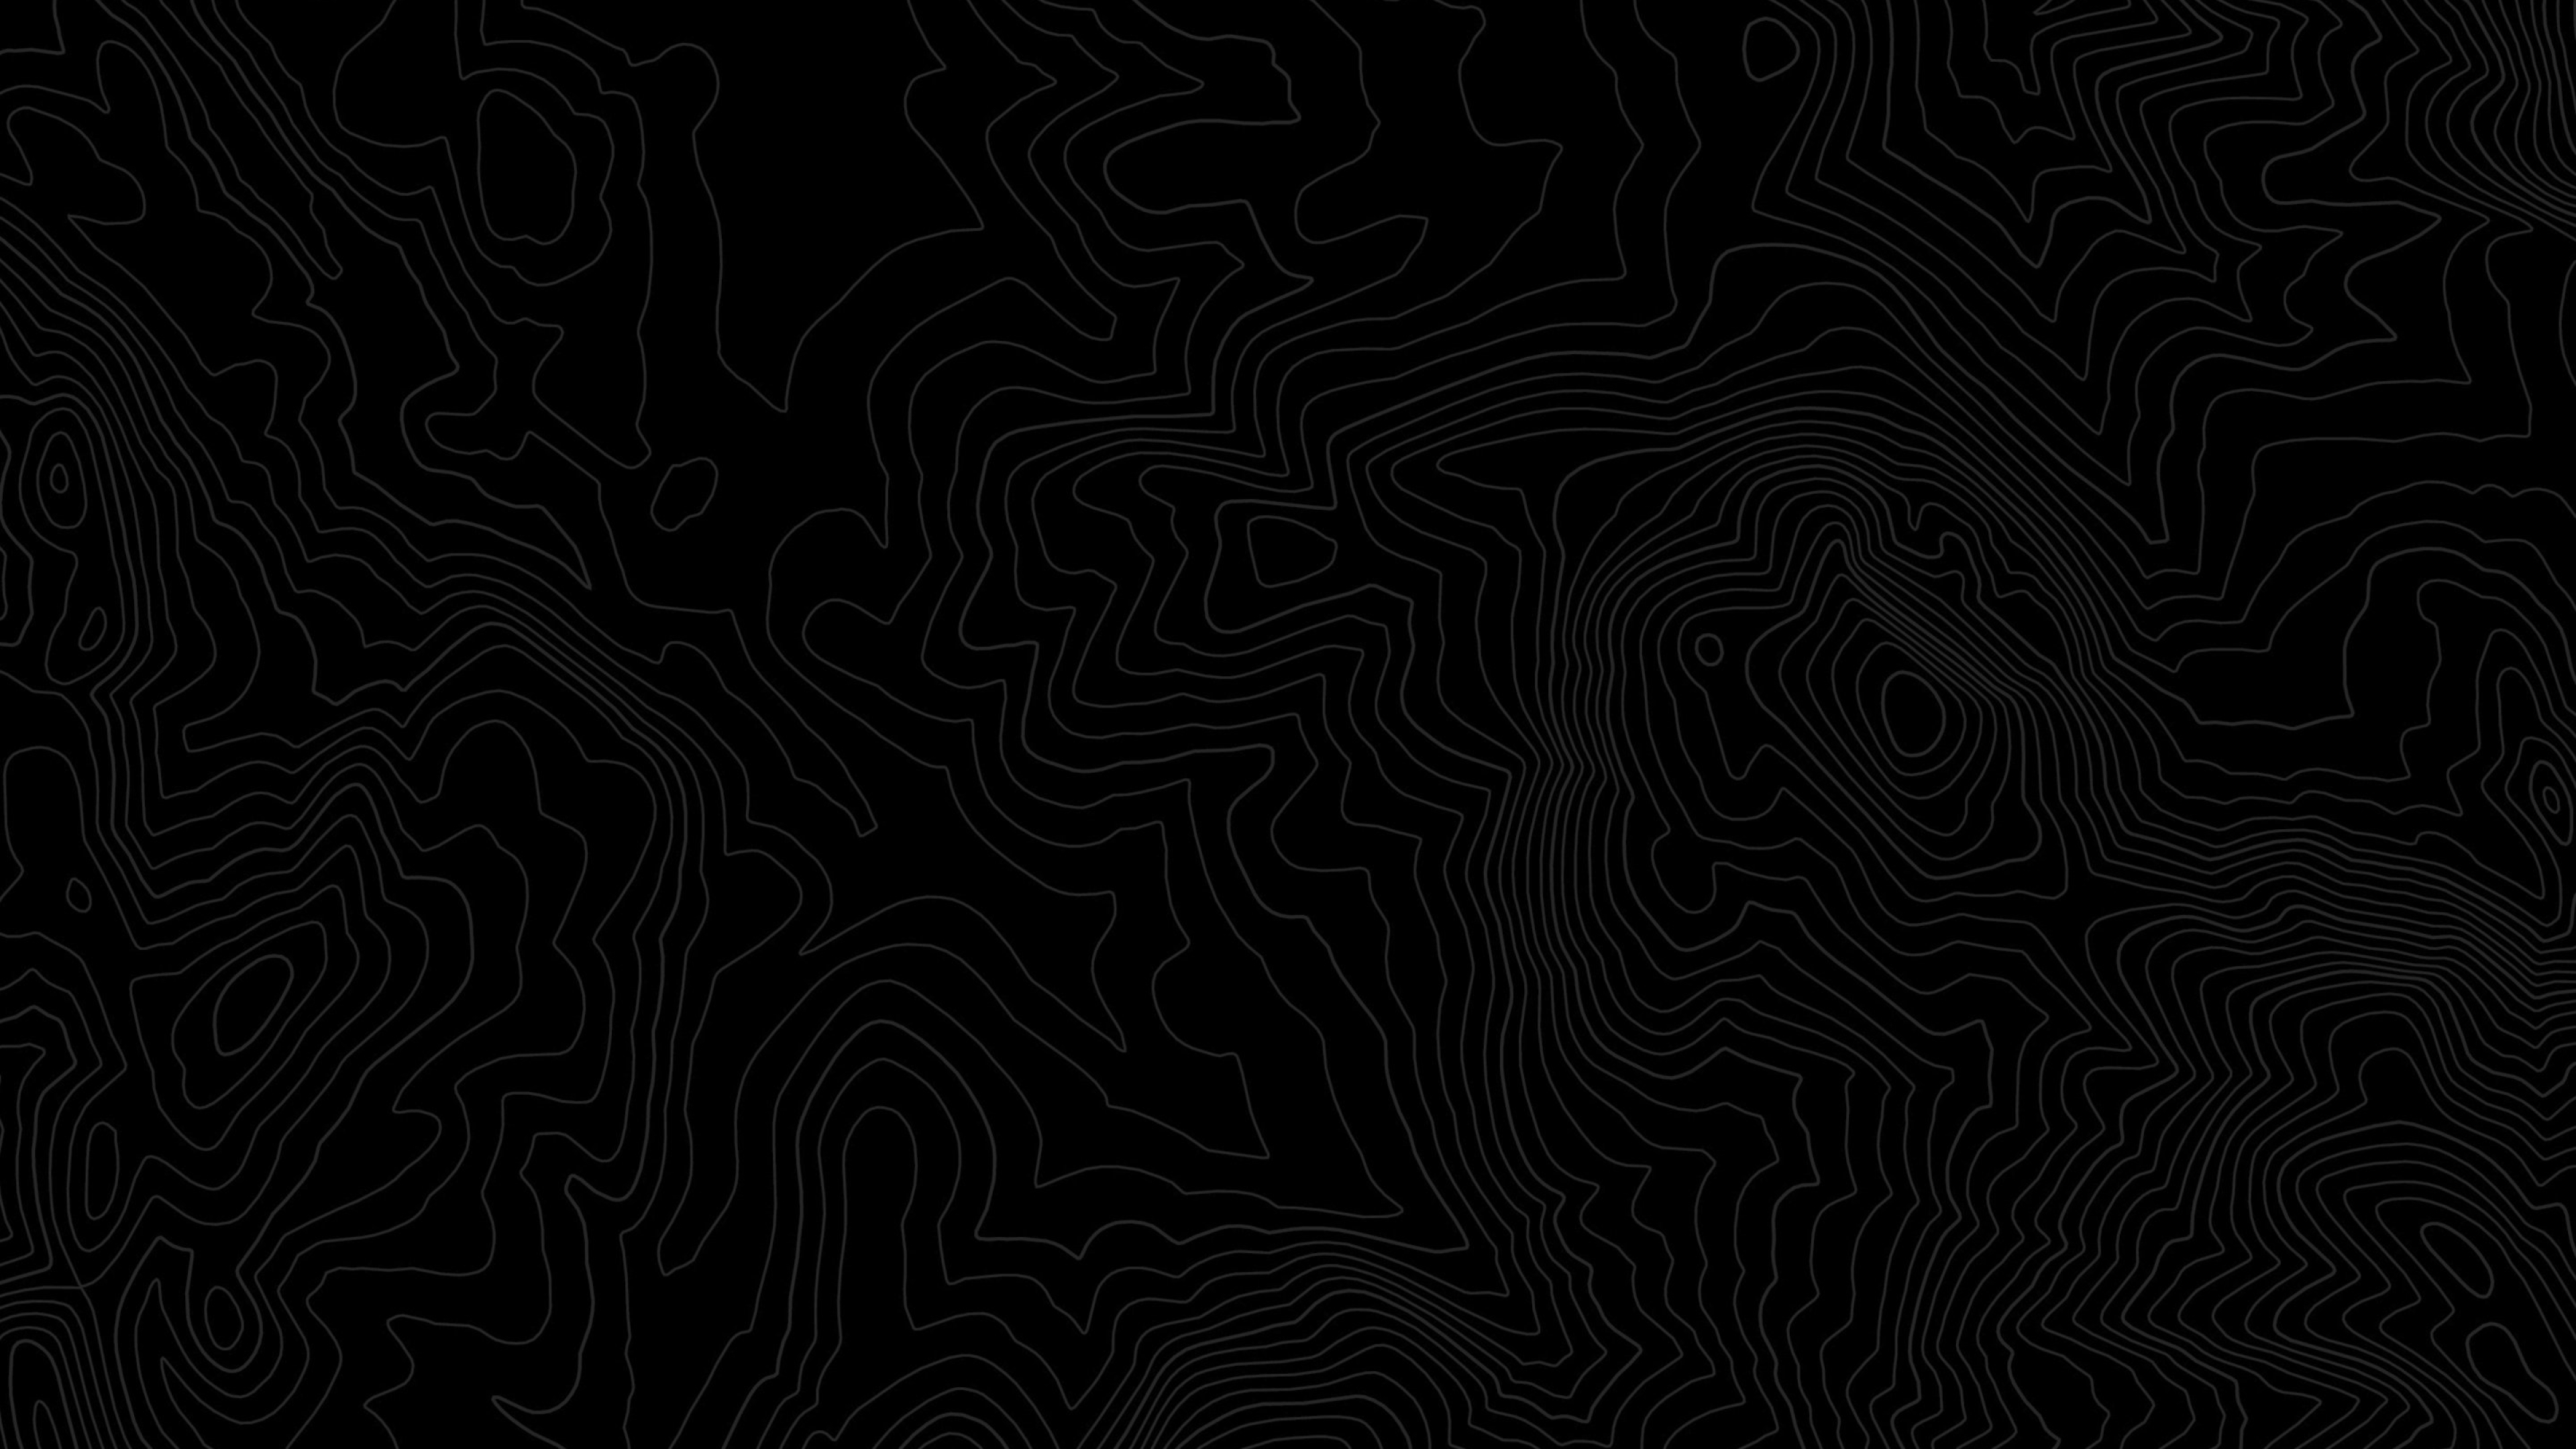 3840x2160 Topography Abstract Black Texture 4k Wallpaper Hd Abstract